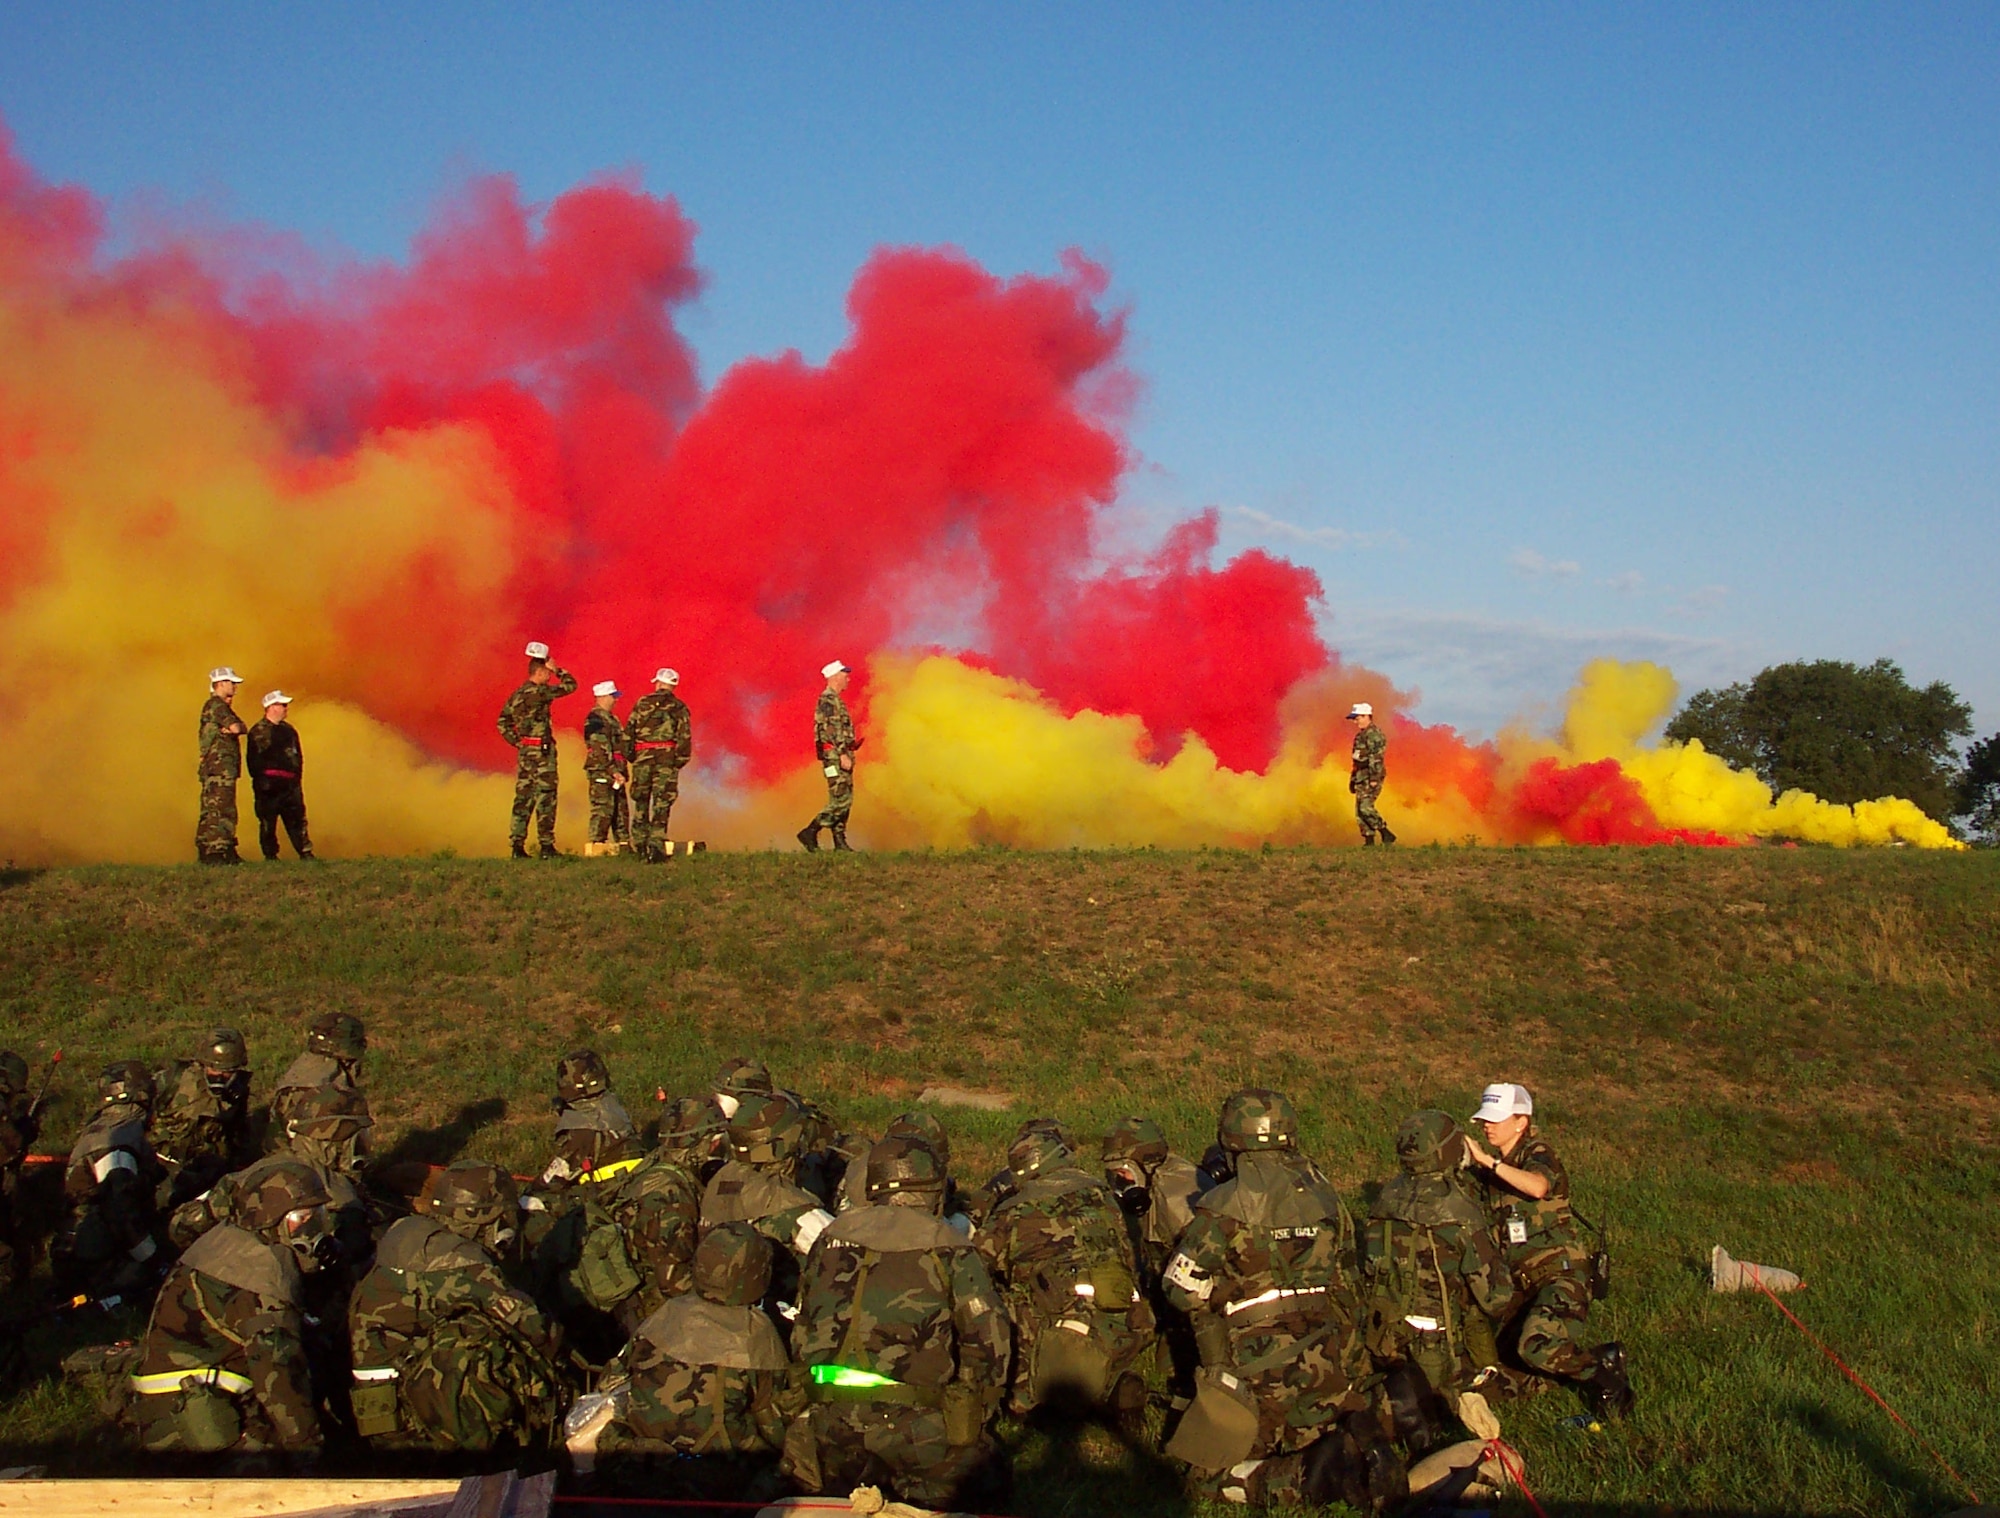 As smoke canisters explode, members of the 85th Aerial Port Squadron take cover at Volk Field, Wisc., during a practice for the unit's upcoming Operational Readiness Inspection. The 85th APS is the 439th Airlift Wing's geographically separated unit located at Hanscom Air Force Base, Mass. (US Air Force photo/Capt. Rebecca Boothby)